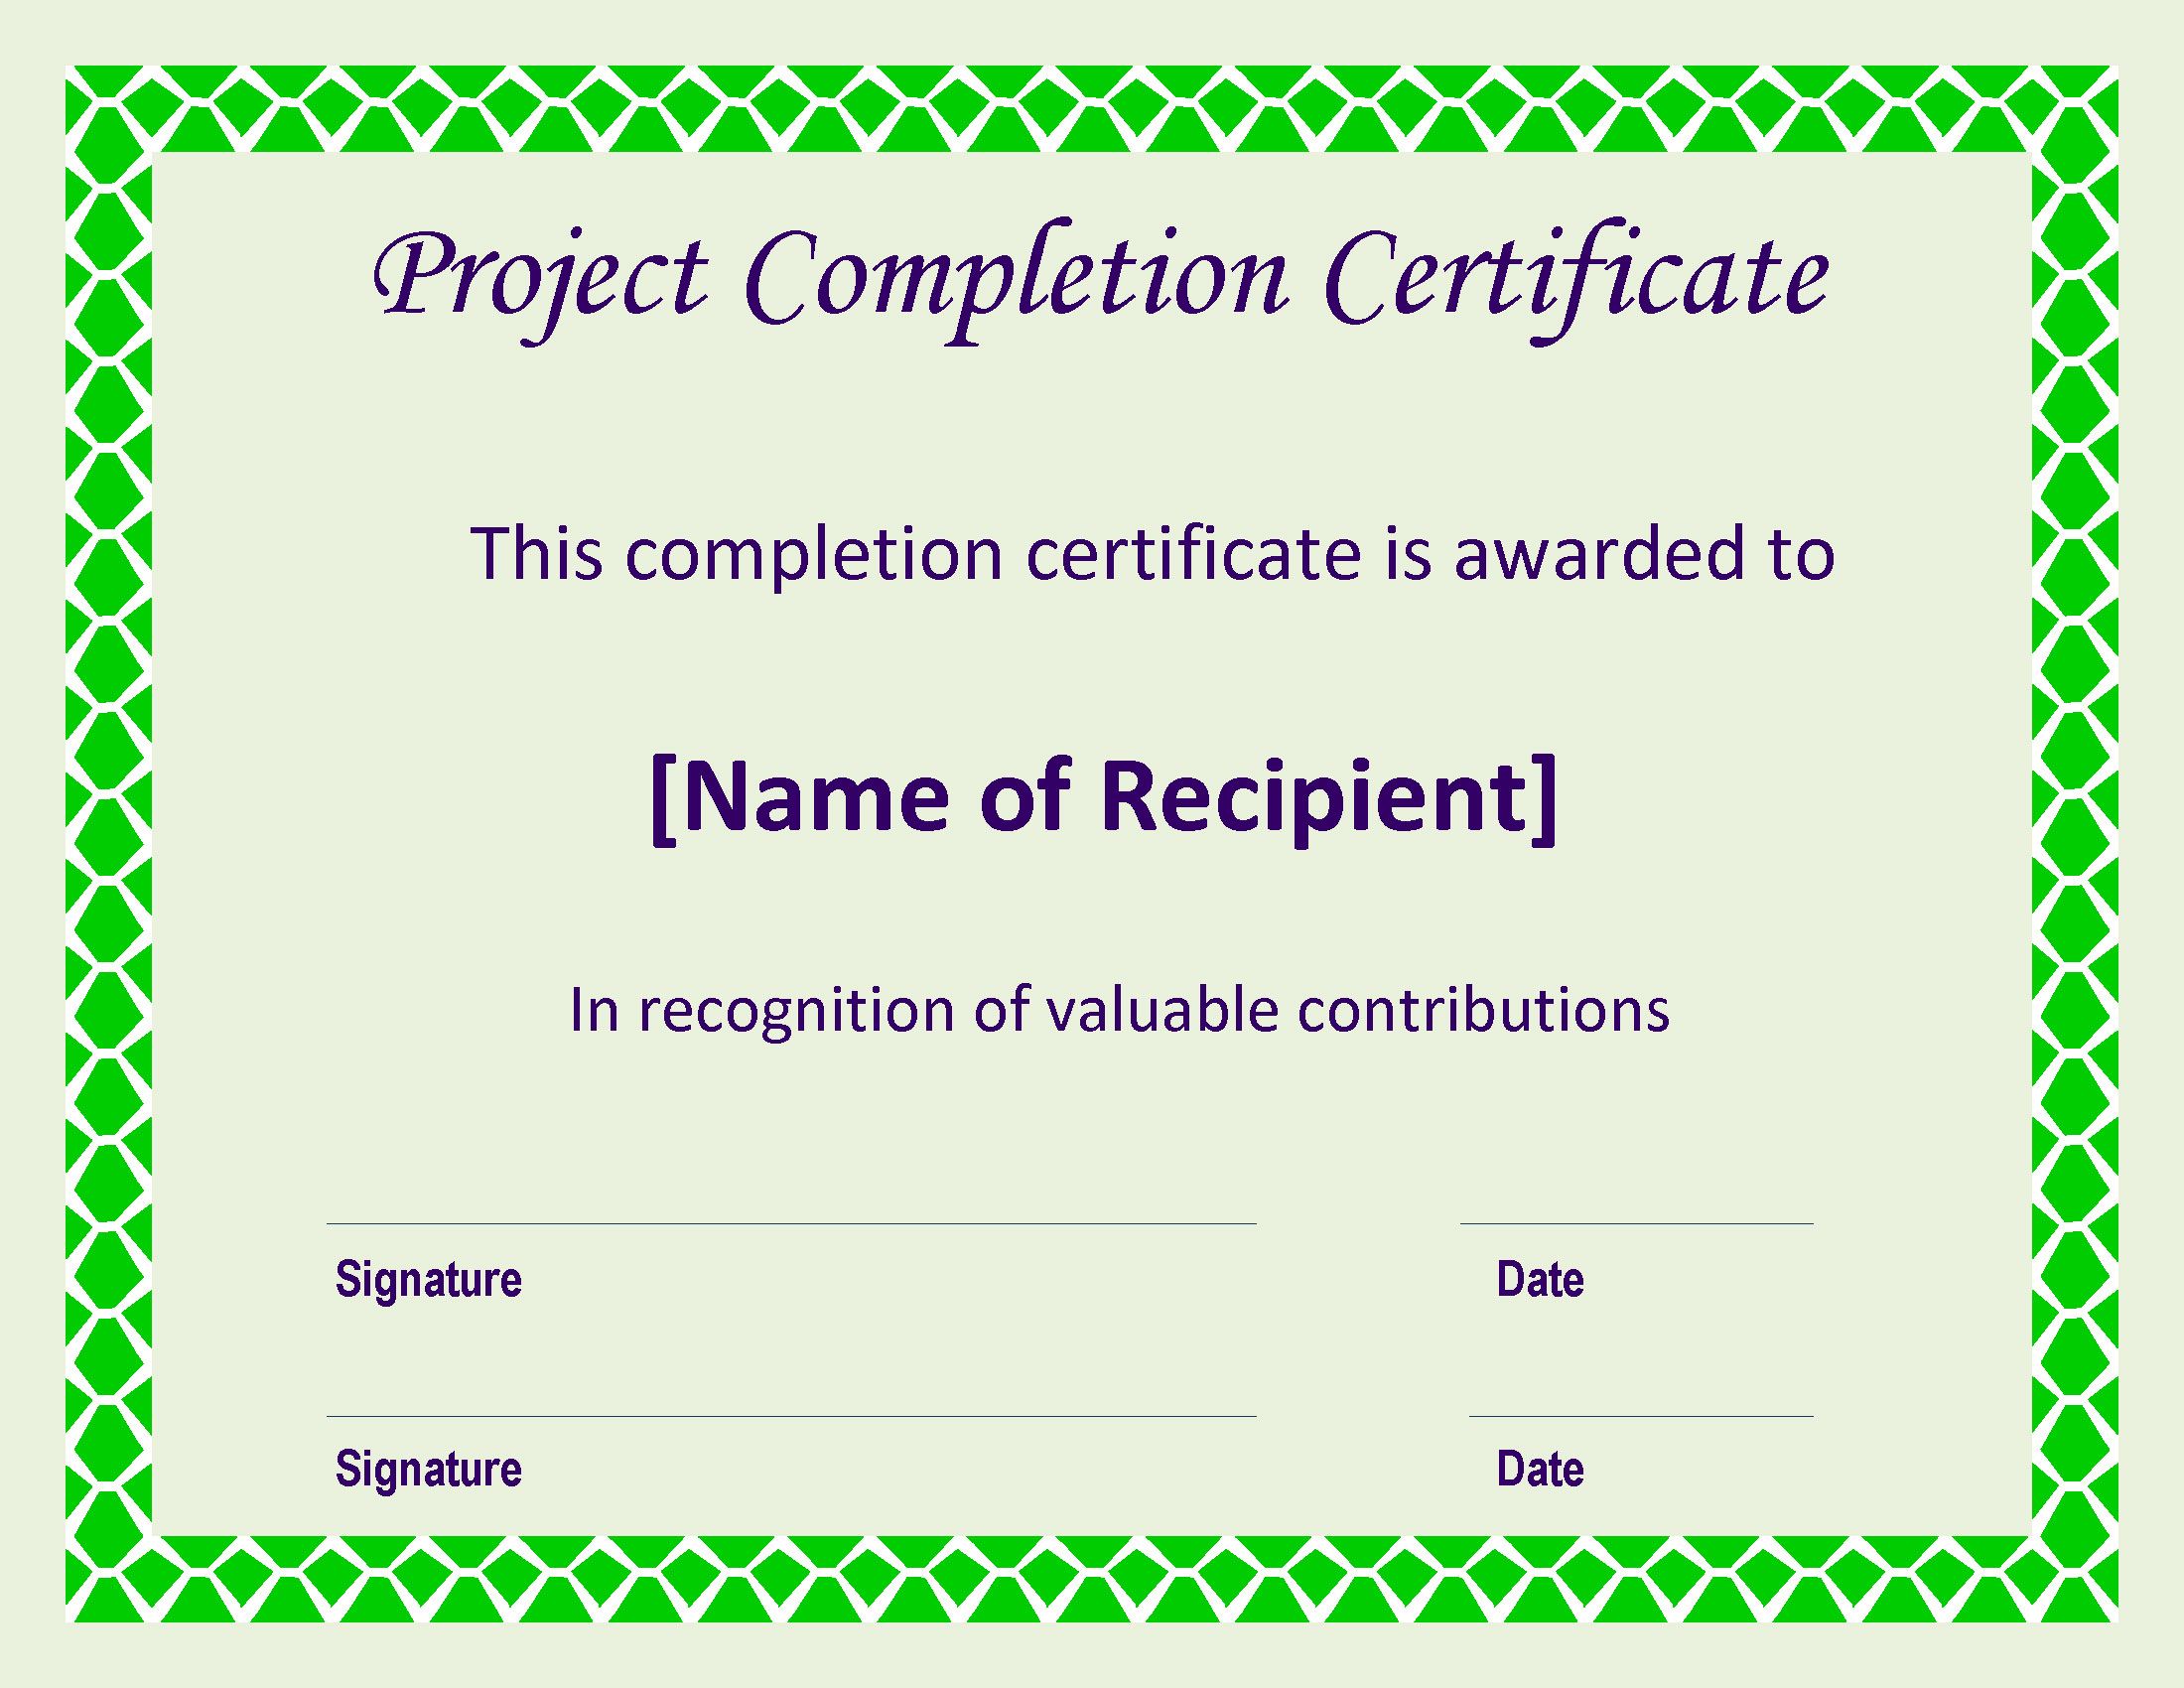 Certificate of Completion project main image